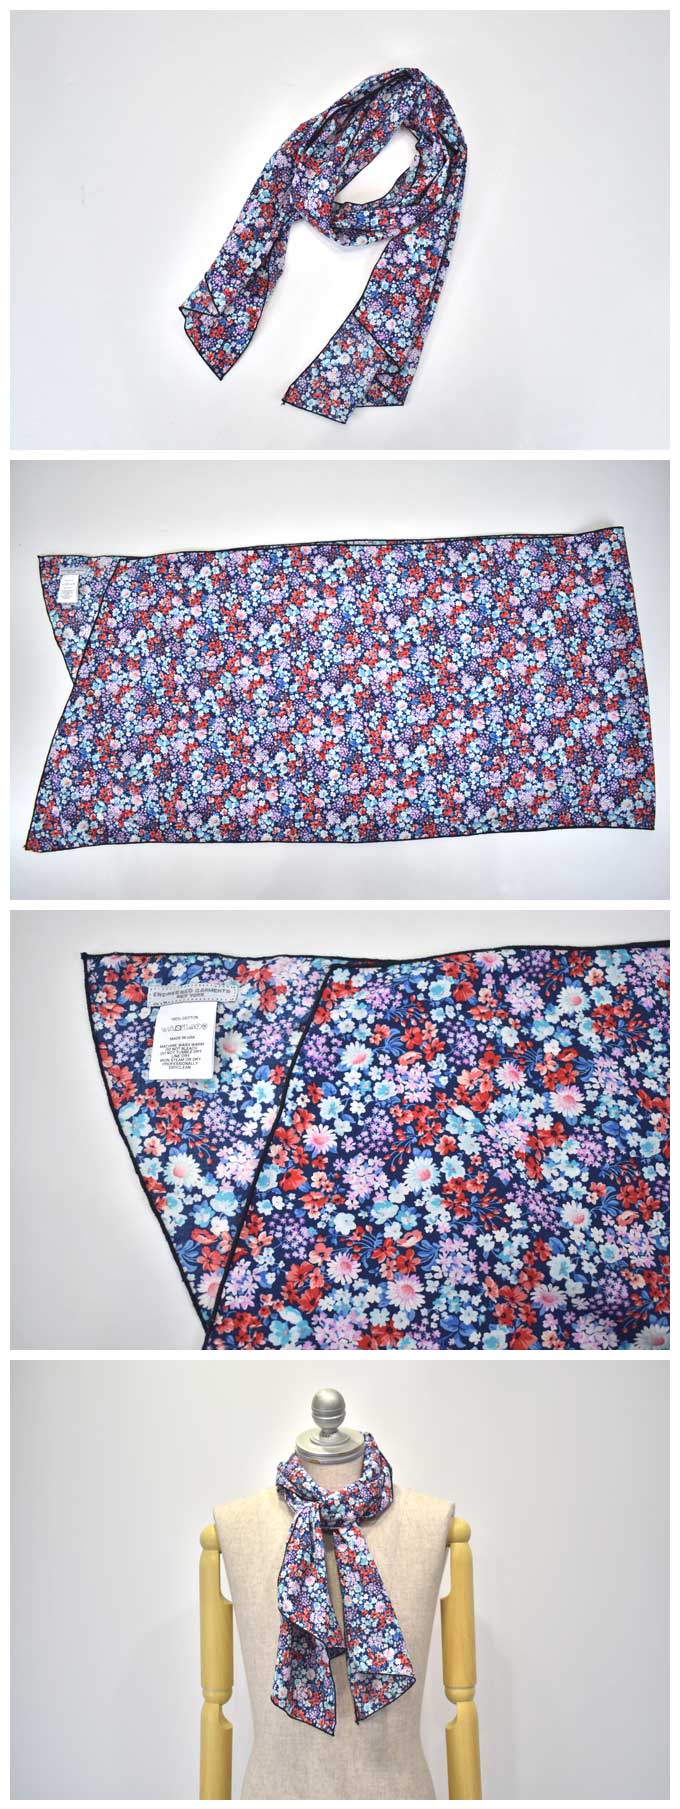 ENGINEERED GARMENTS Long Scarf (Floral Lawn)